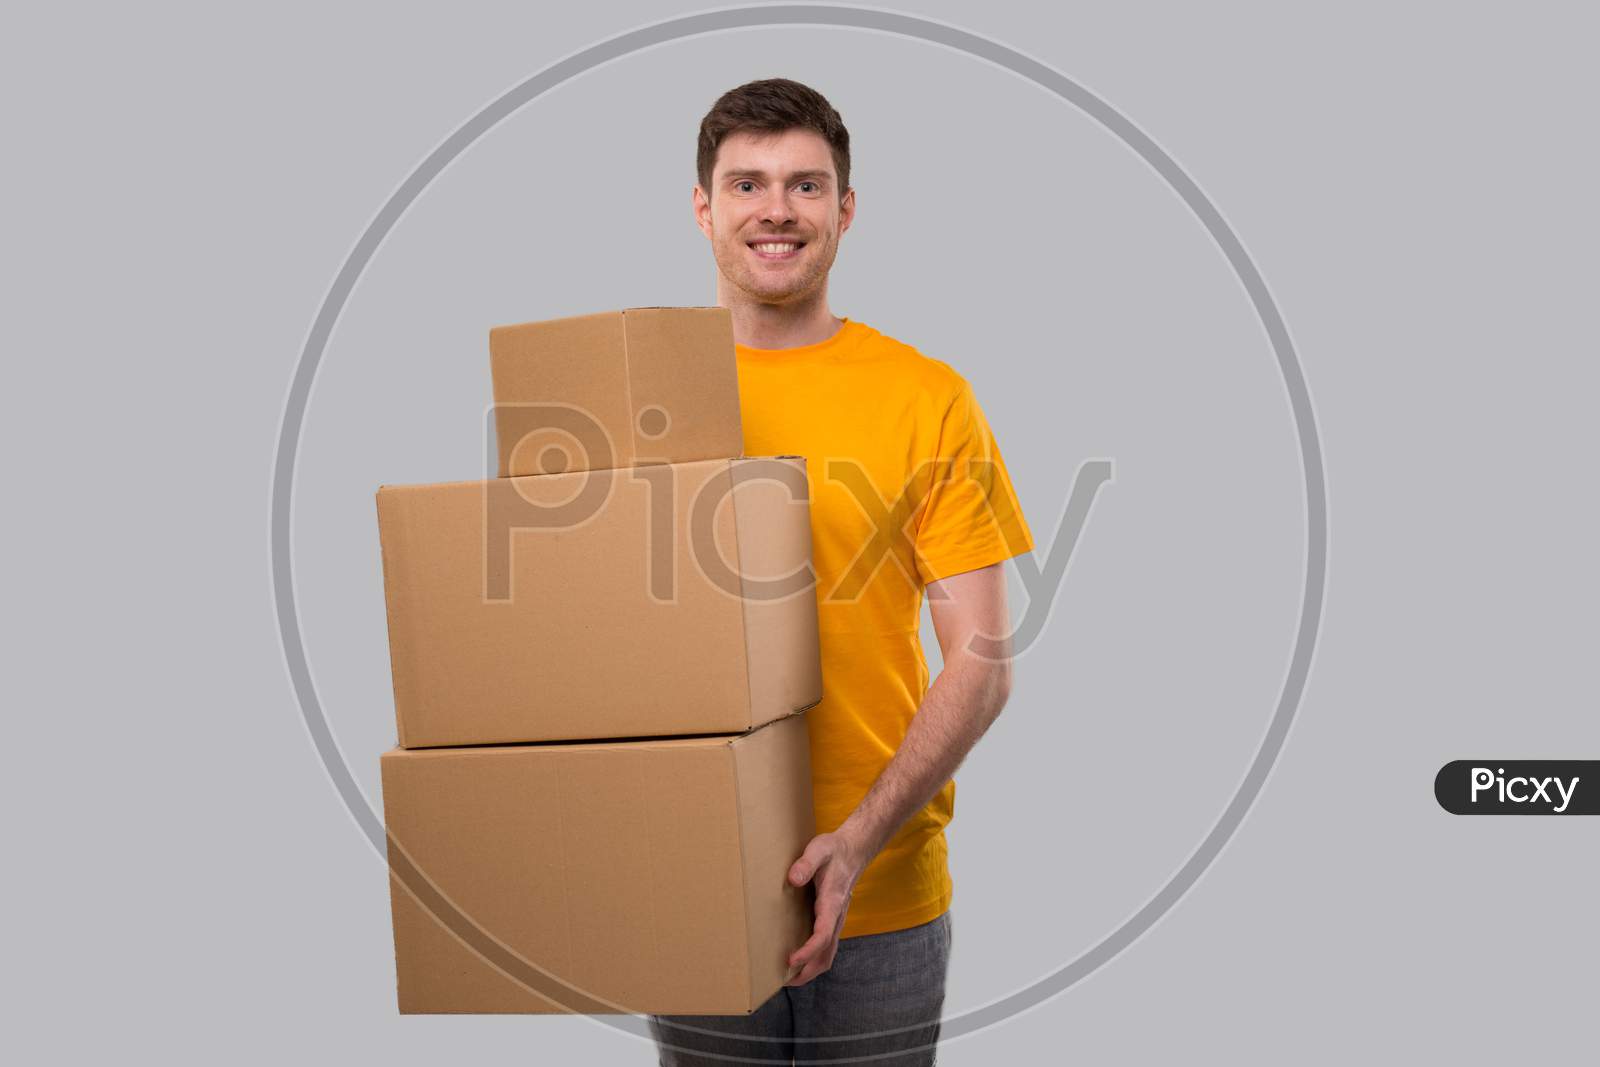 Delivery Man Holding Carton Boxes. Delivery Boy Smiling With Boxes In Hands